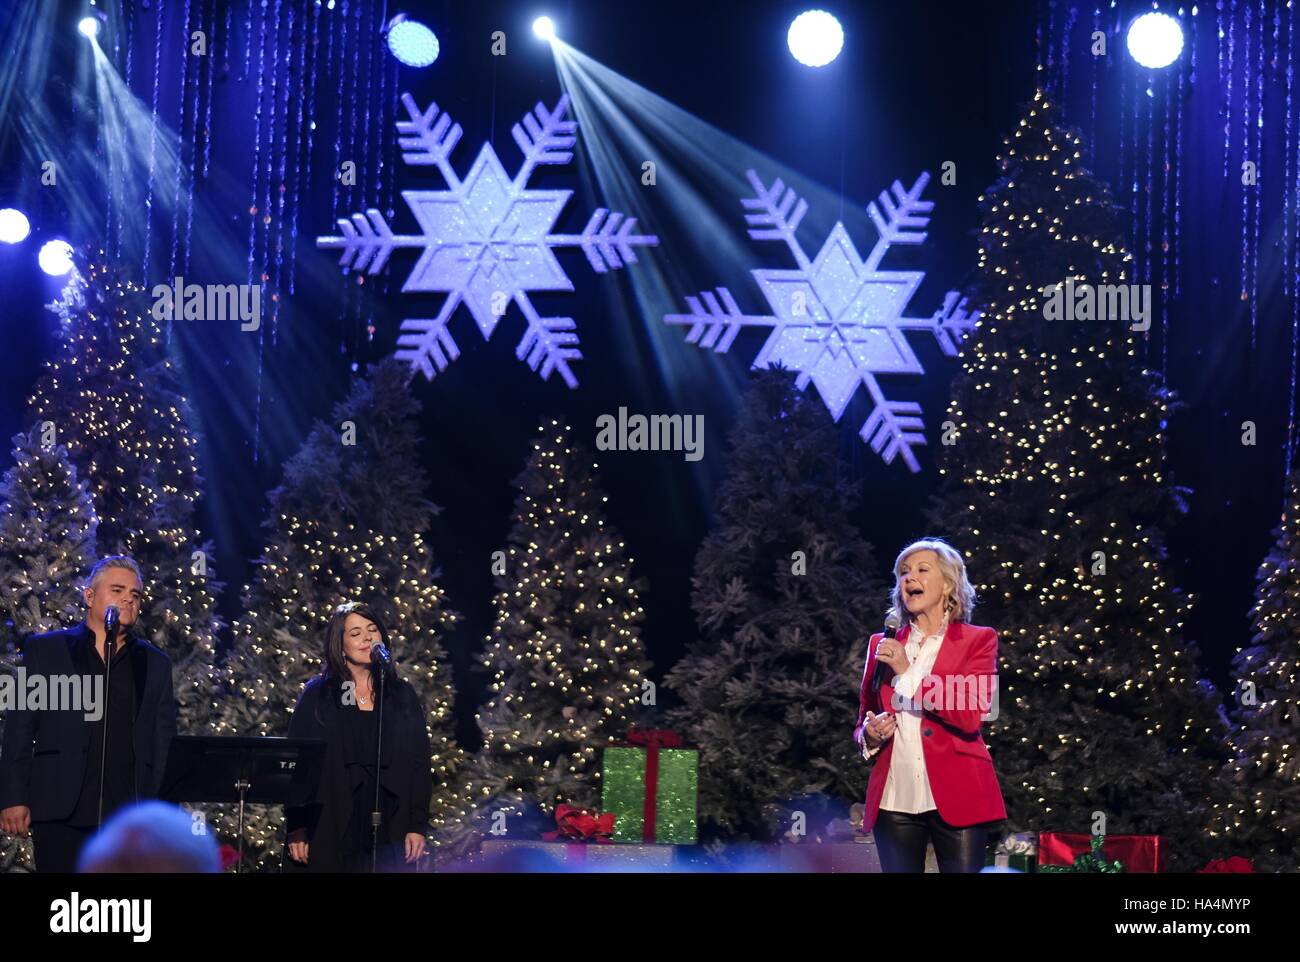 Los Angeles, California, USA. 27th Nov, 2016. Olivia Newton-John performs at the Pre-Parade All-Star Concert during the 85th Annual Hollywood Christmas Parade in Los Angeles on Sunday December 27, 2016. Credit:  Ringo Chiu/ZUMA Wire/Alamy Live News Stock Photo